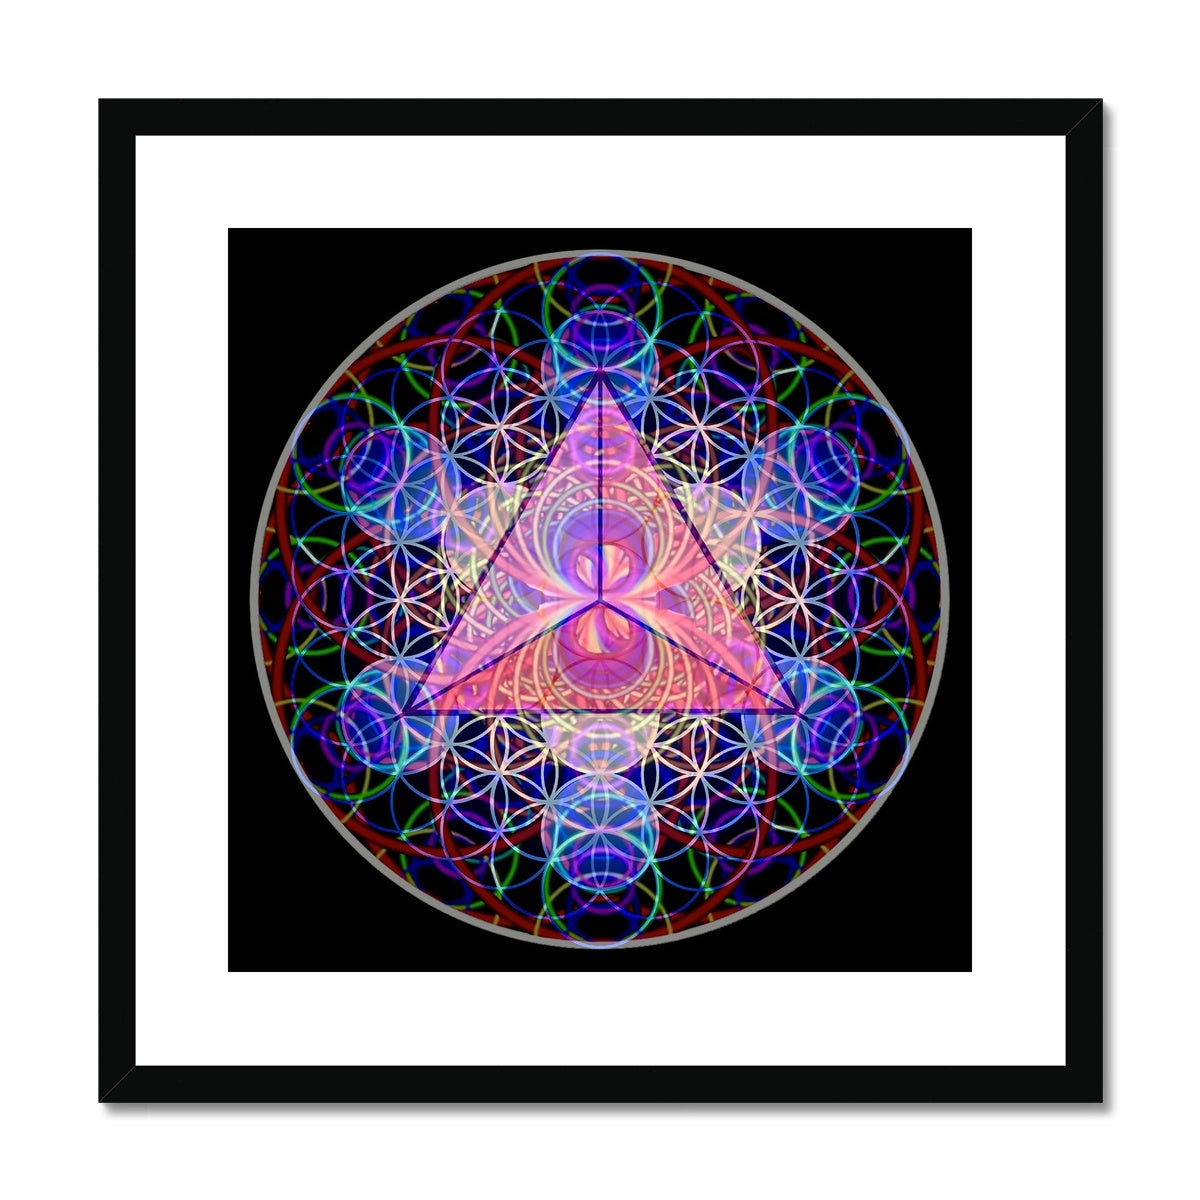 The Platonic Solid Tetrahedron with the inverted sound waves Framed & Mounted Print